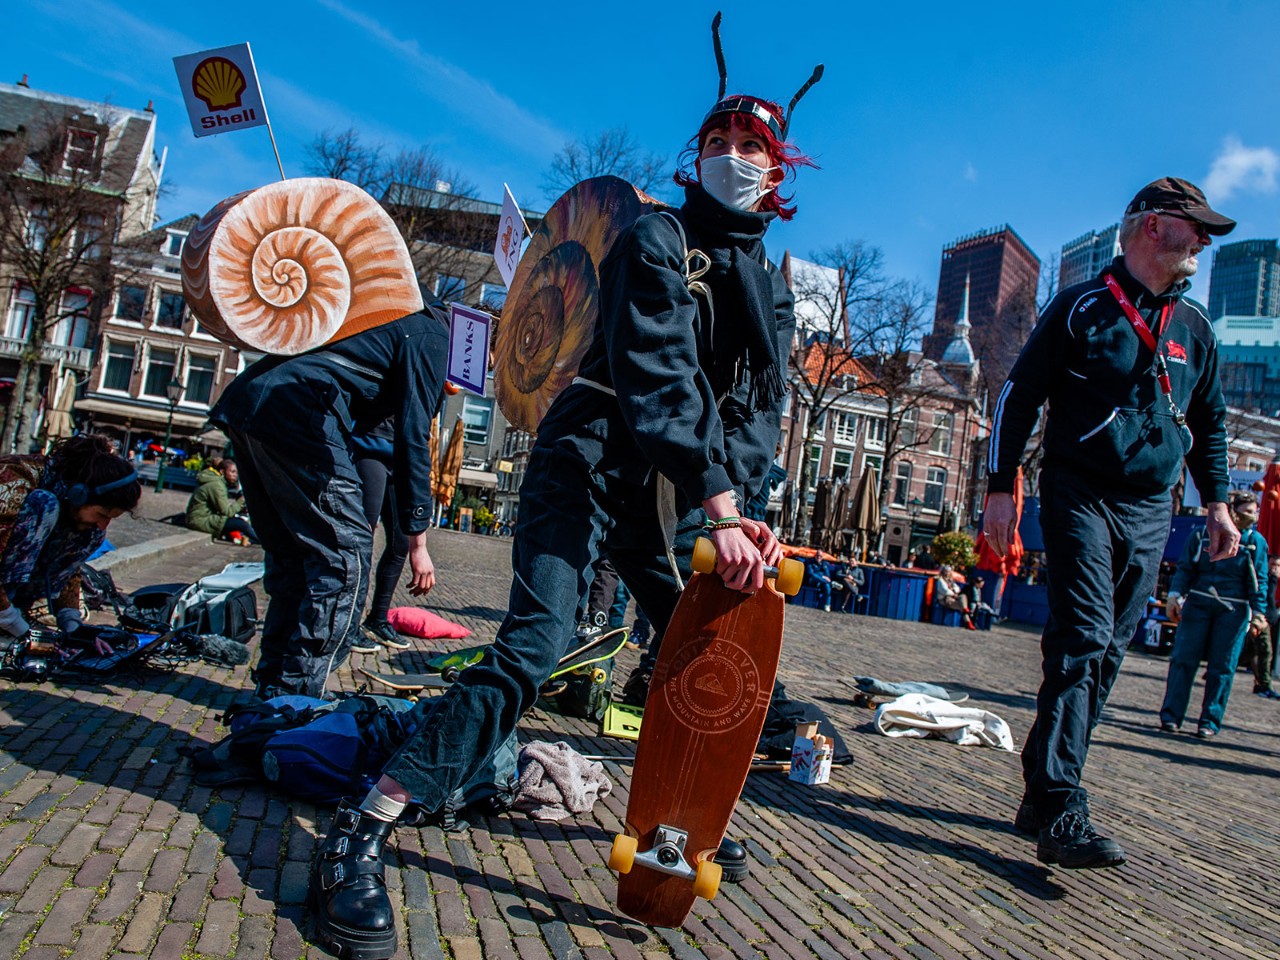 Activists in The Hague, The Netherlands, April 2021